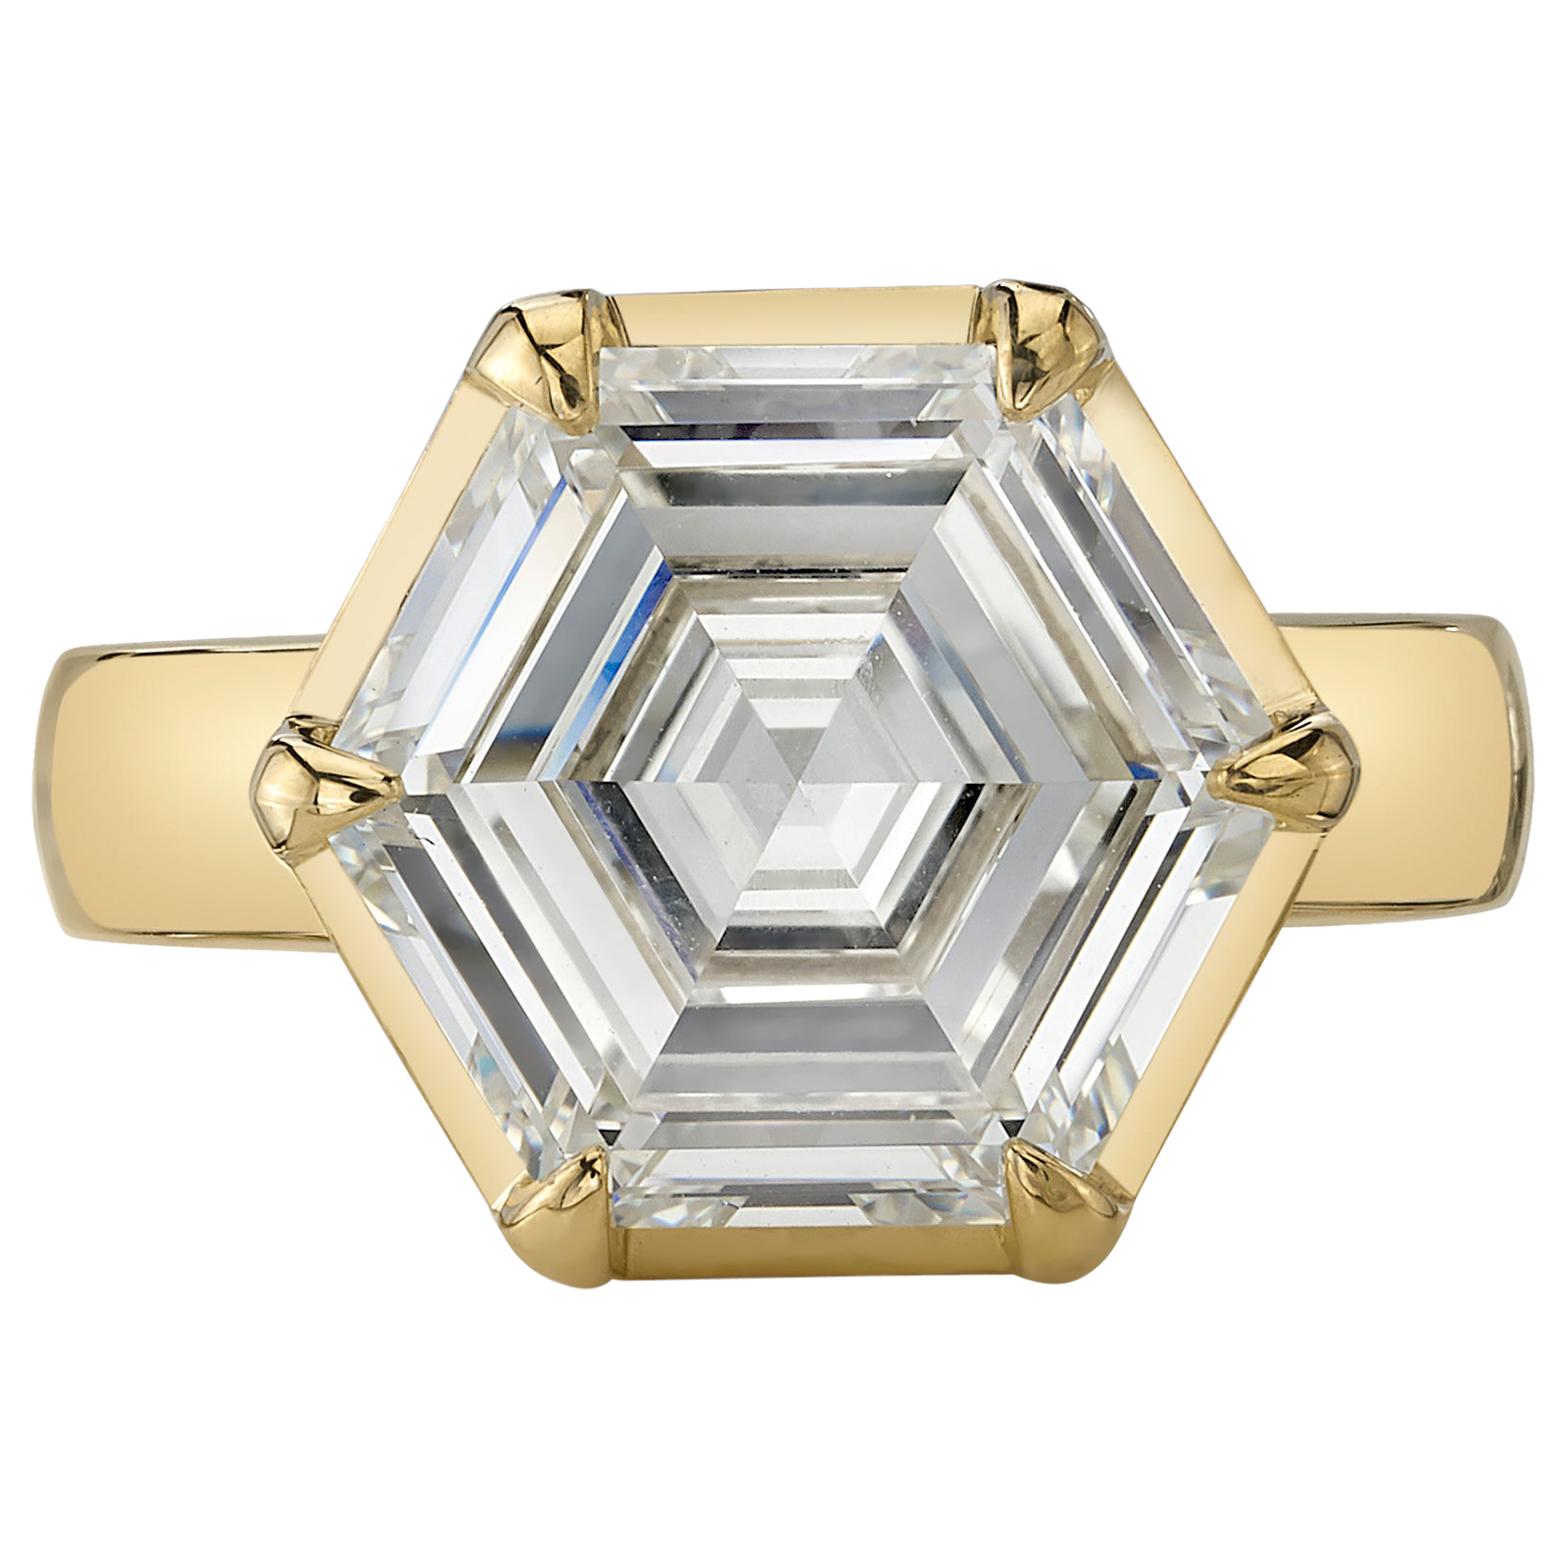 Handcrafted Odette Hexagonal Step Cut Diamond Ring by Single Stone